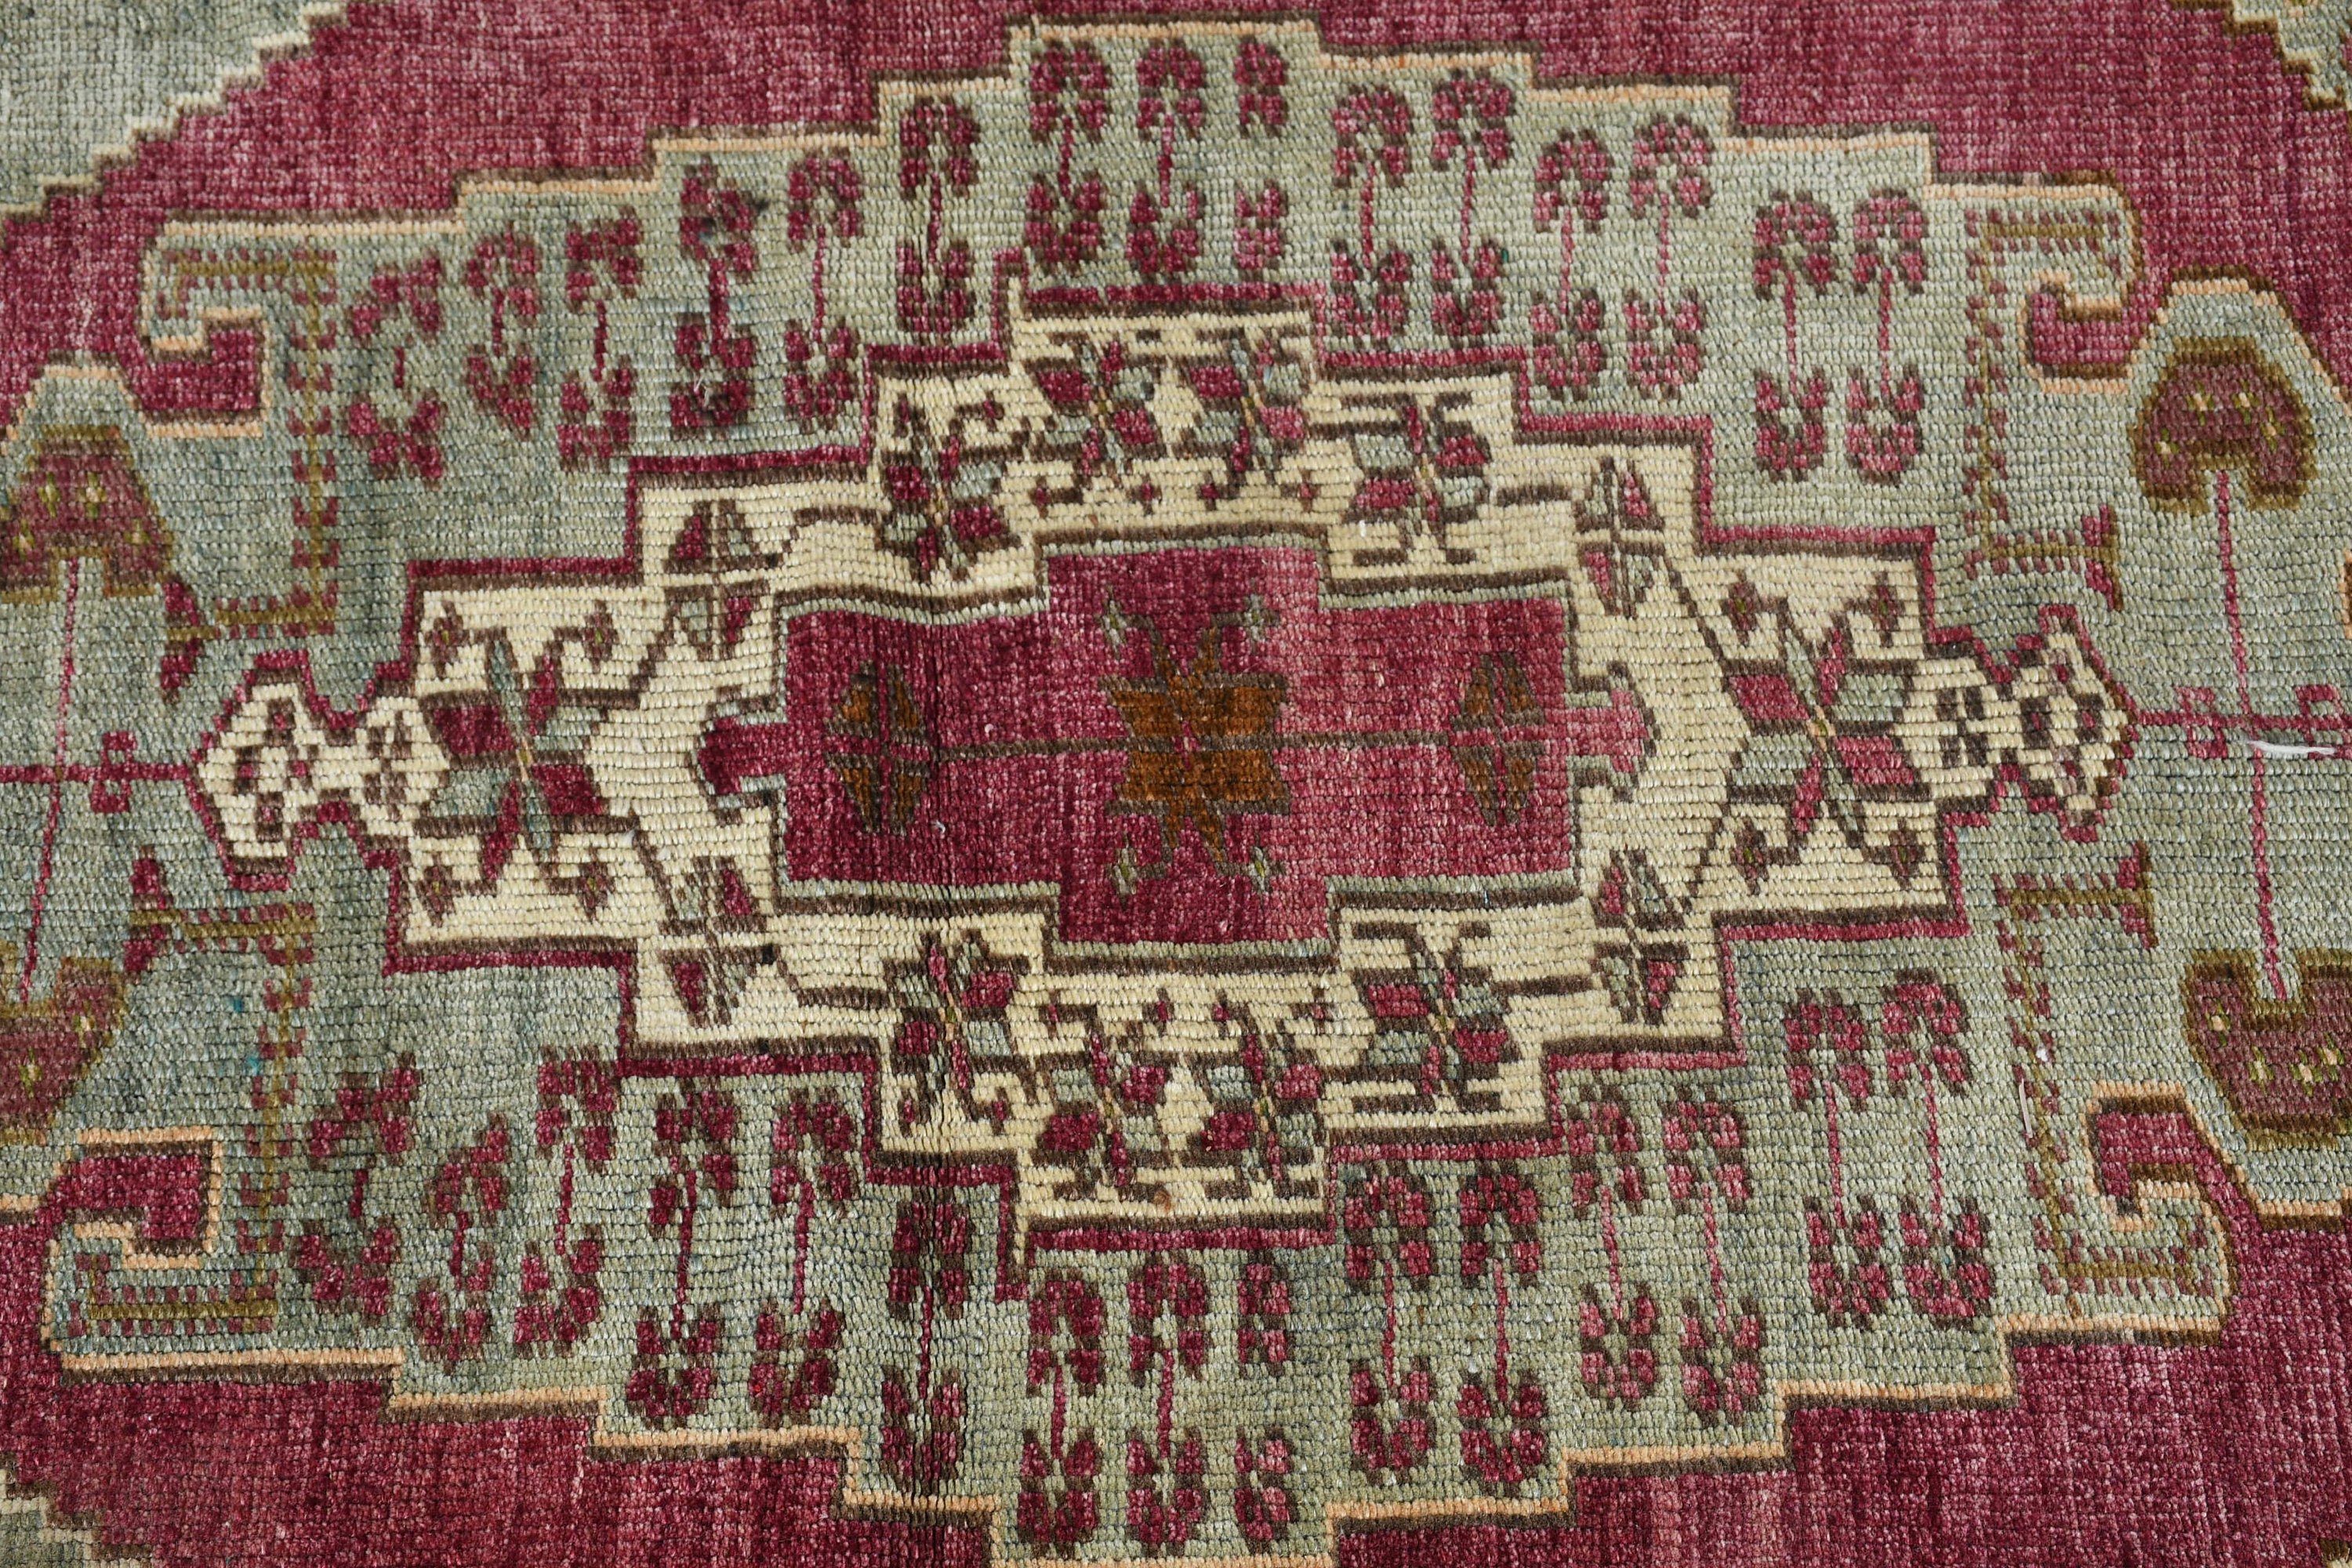 Red Kitchen Rug, 3.7x6.5 ft Area Rug, Oushak Rugs, Indoor Rug, Rugs for Area, Anatolian Rug, Dining Room Rug, Turkish Rugs, Vintage Rug